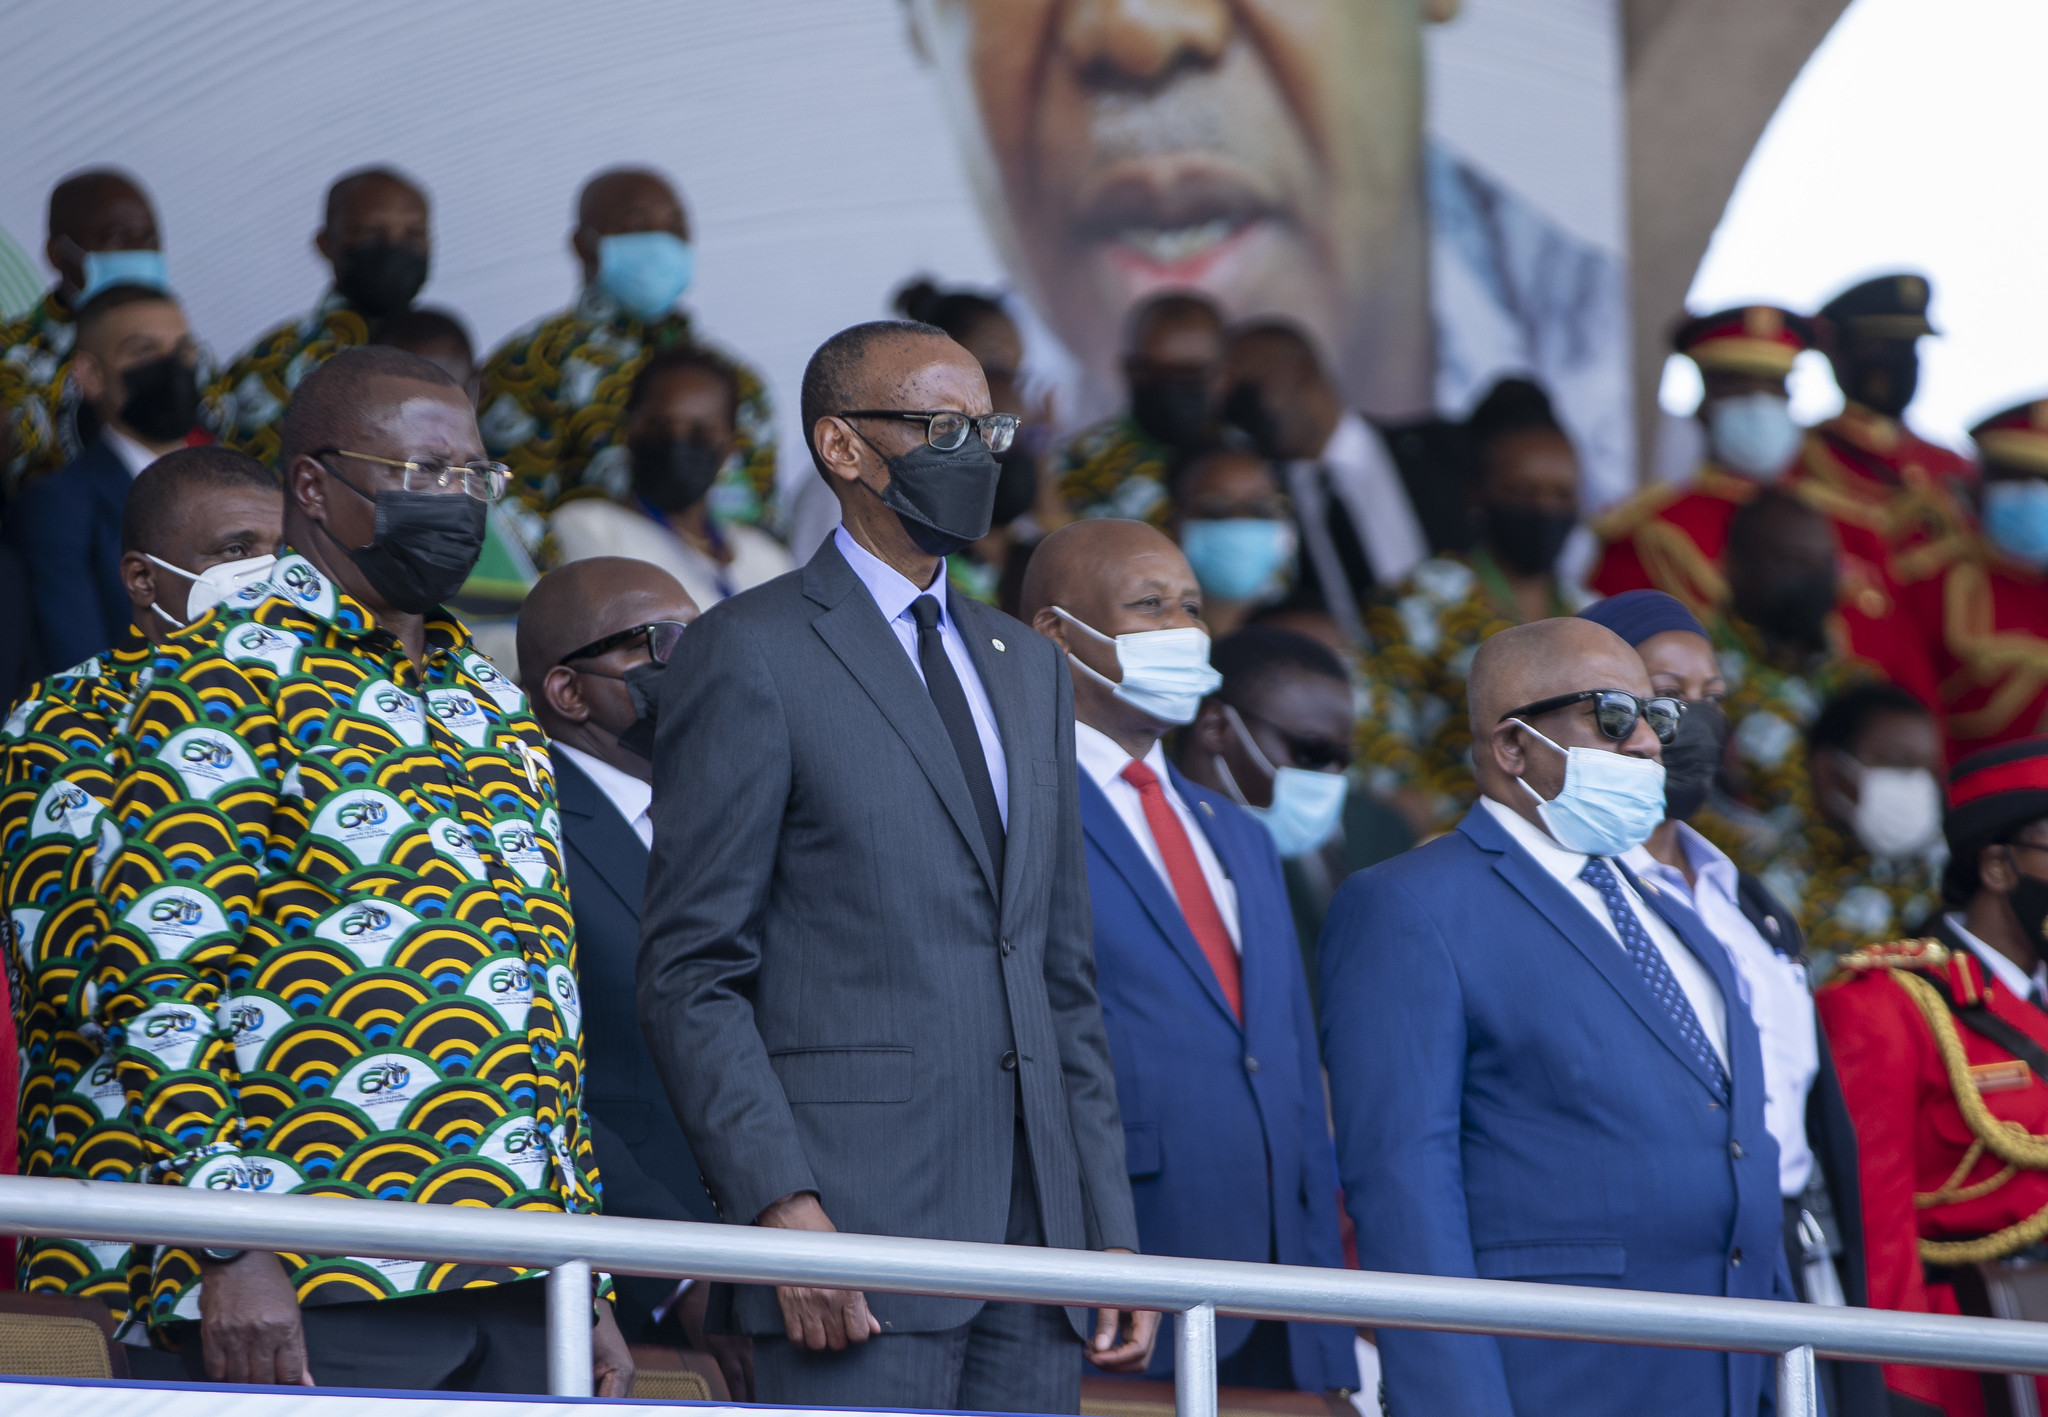 PICTORIAL: President Kagame Attends Tanzania Independence Day Celebrations